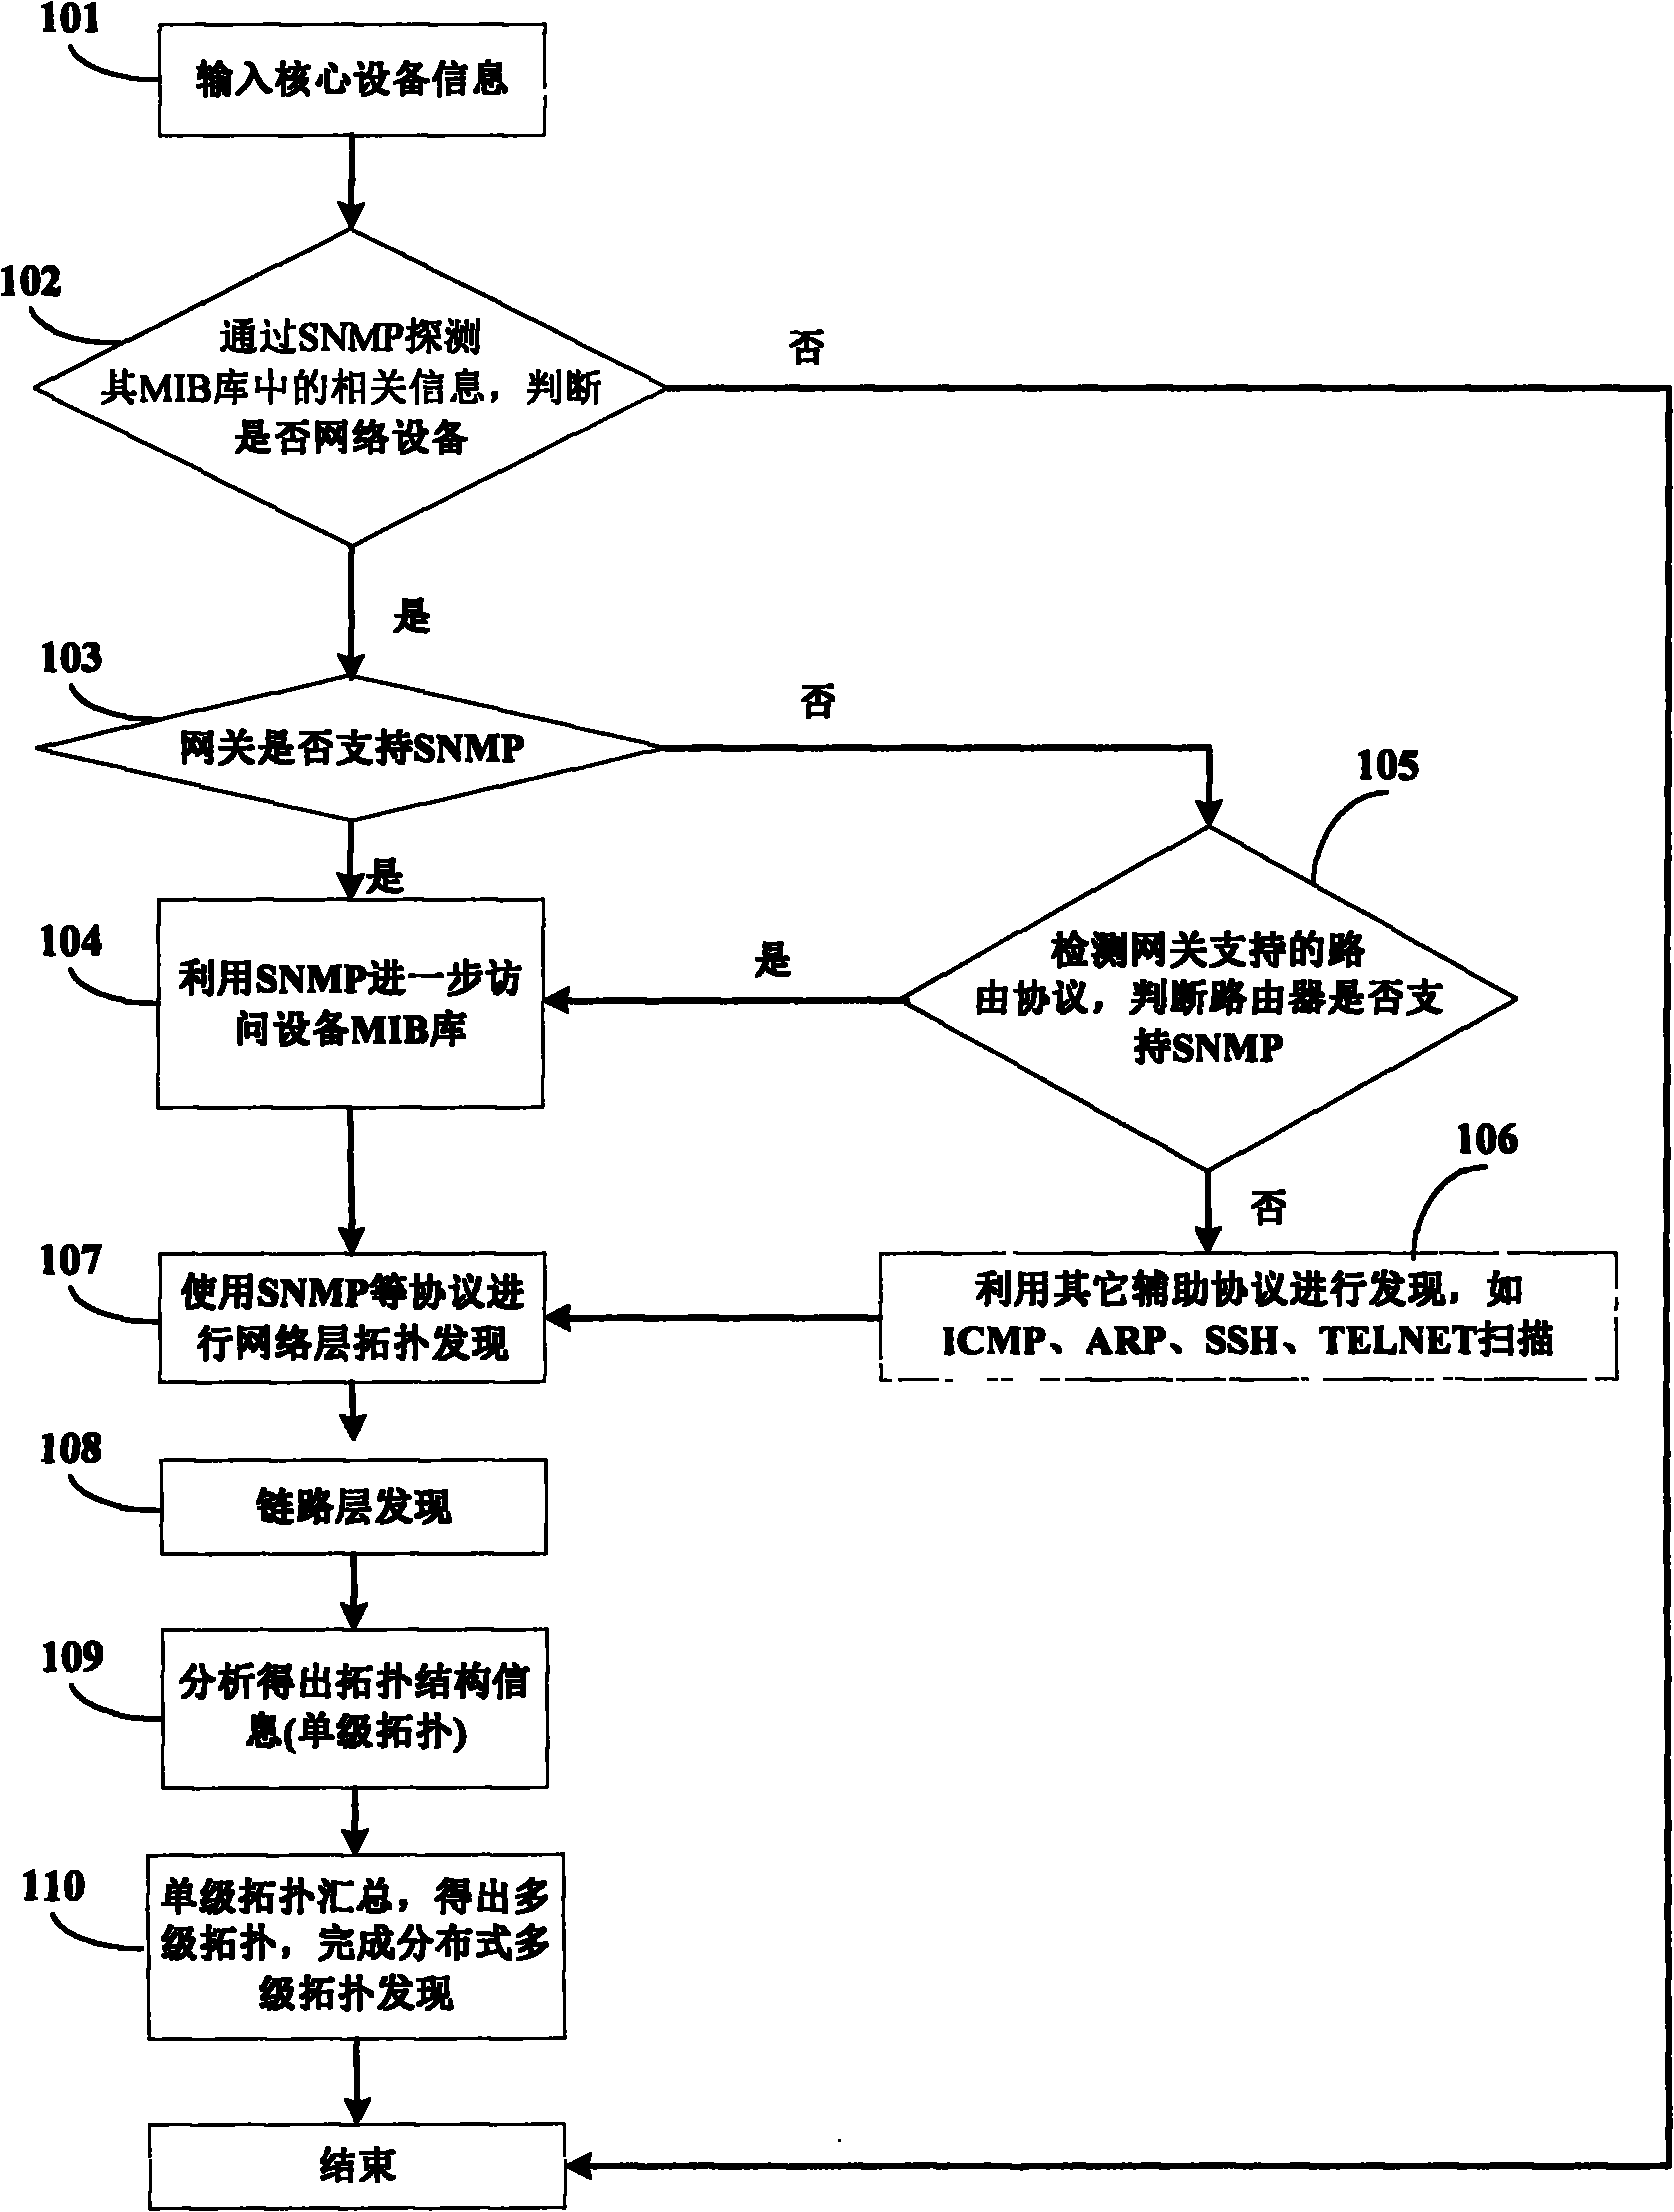 Distribution-based hierarchical network topology discovery method